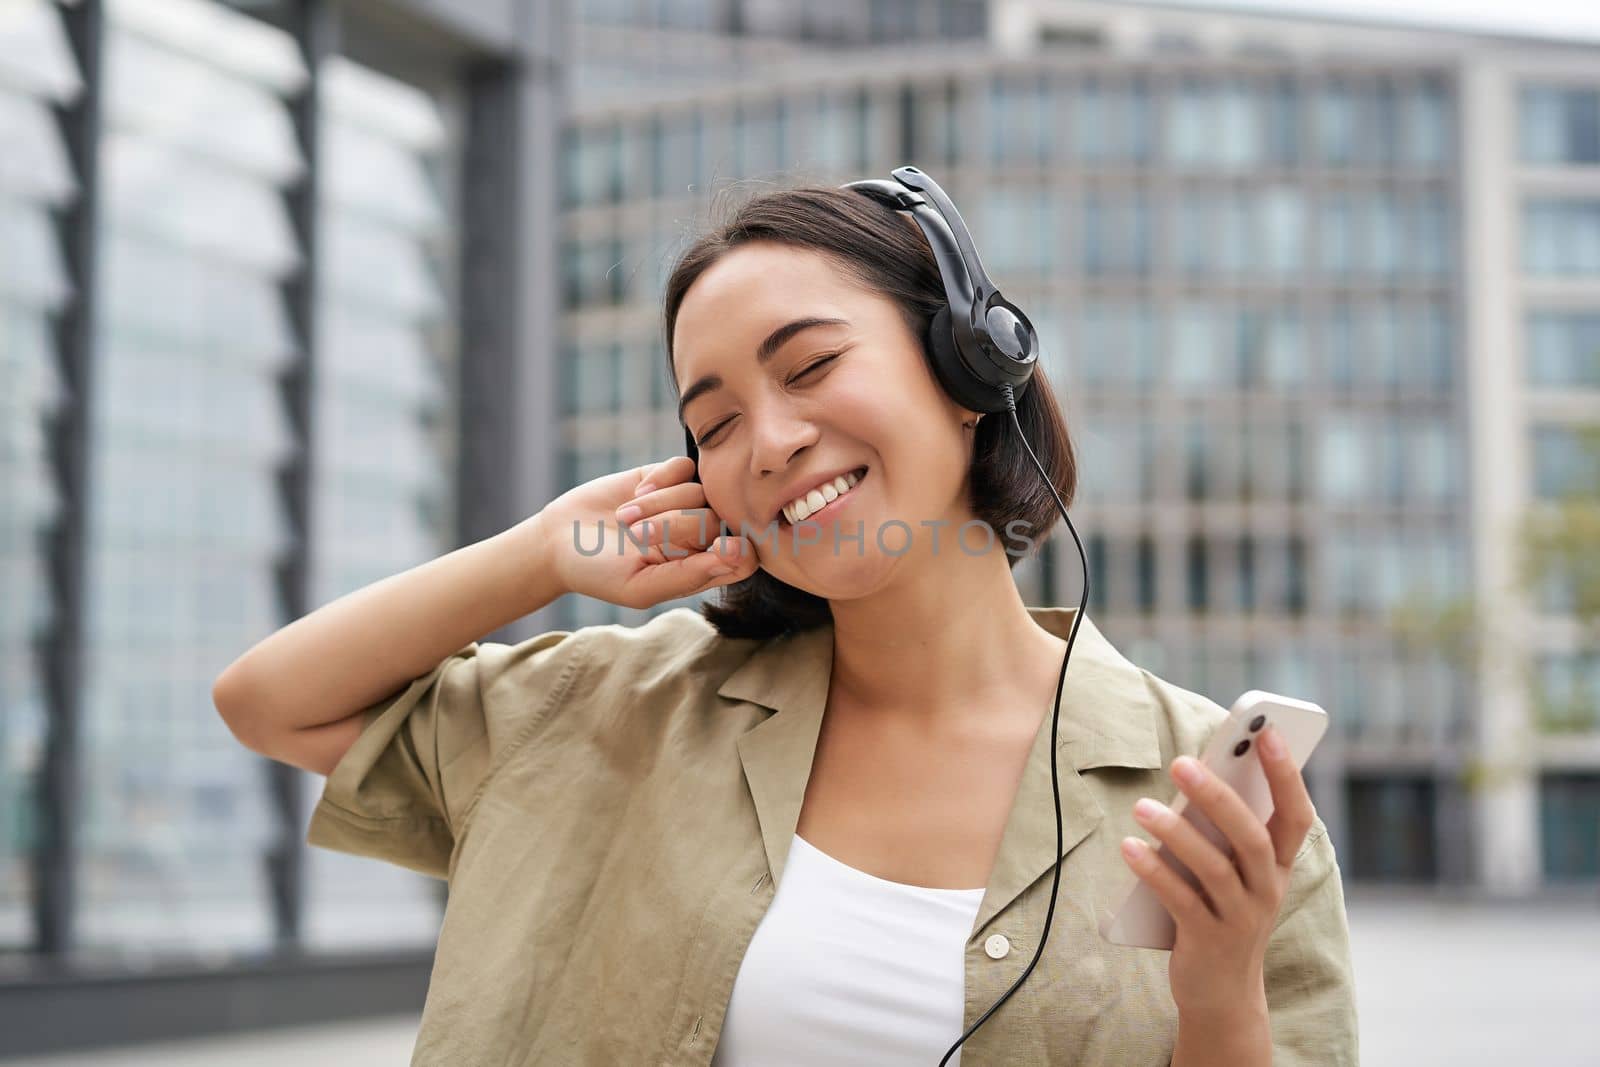 Happy young woman dancing on streets and listening music in headphones, holding smartphone.